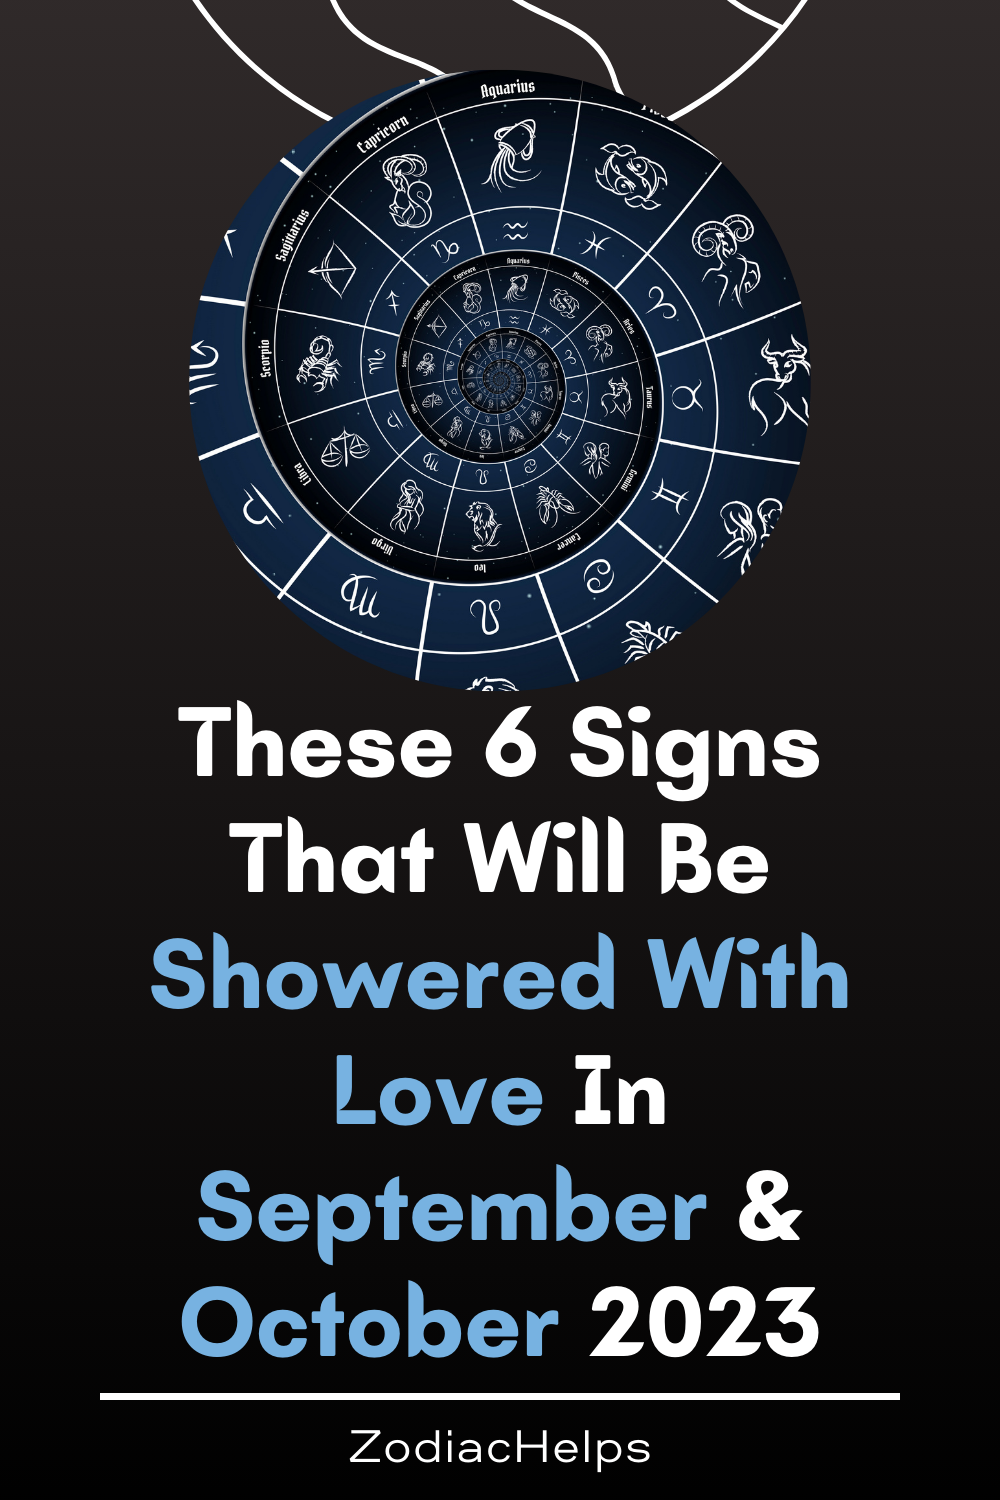 These 6 Signs That Will Be Showered With Love In September & October 2023